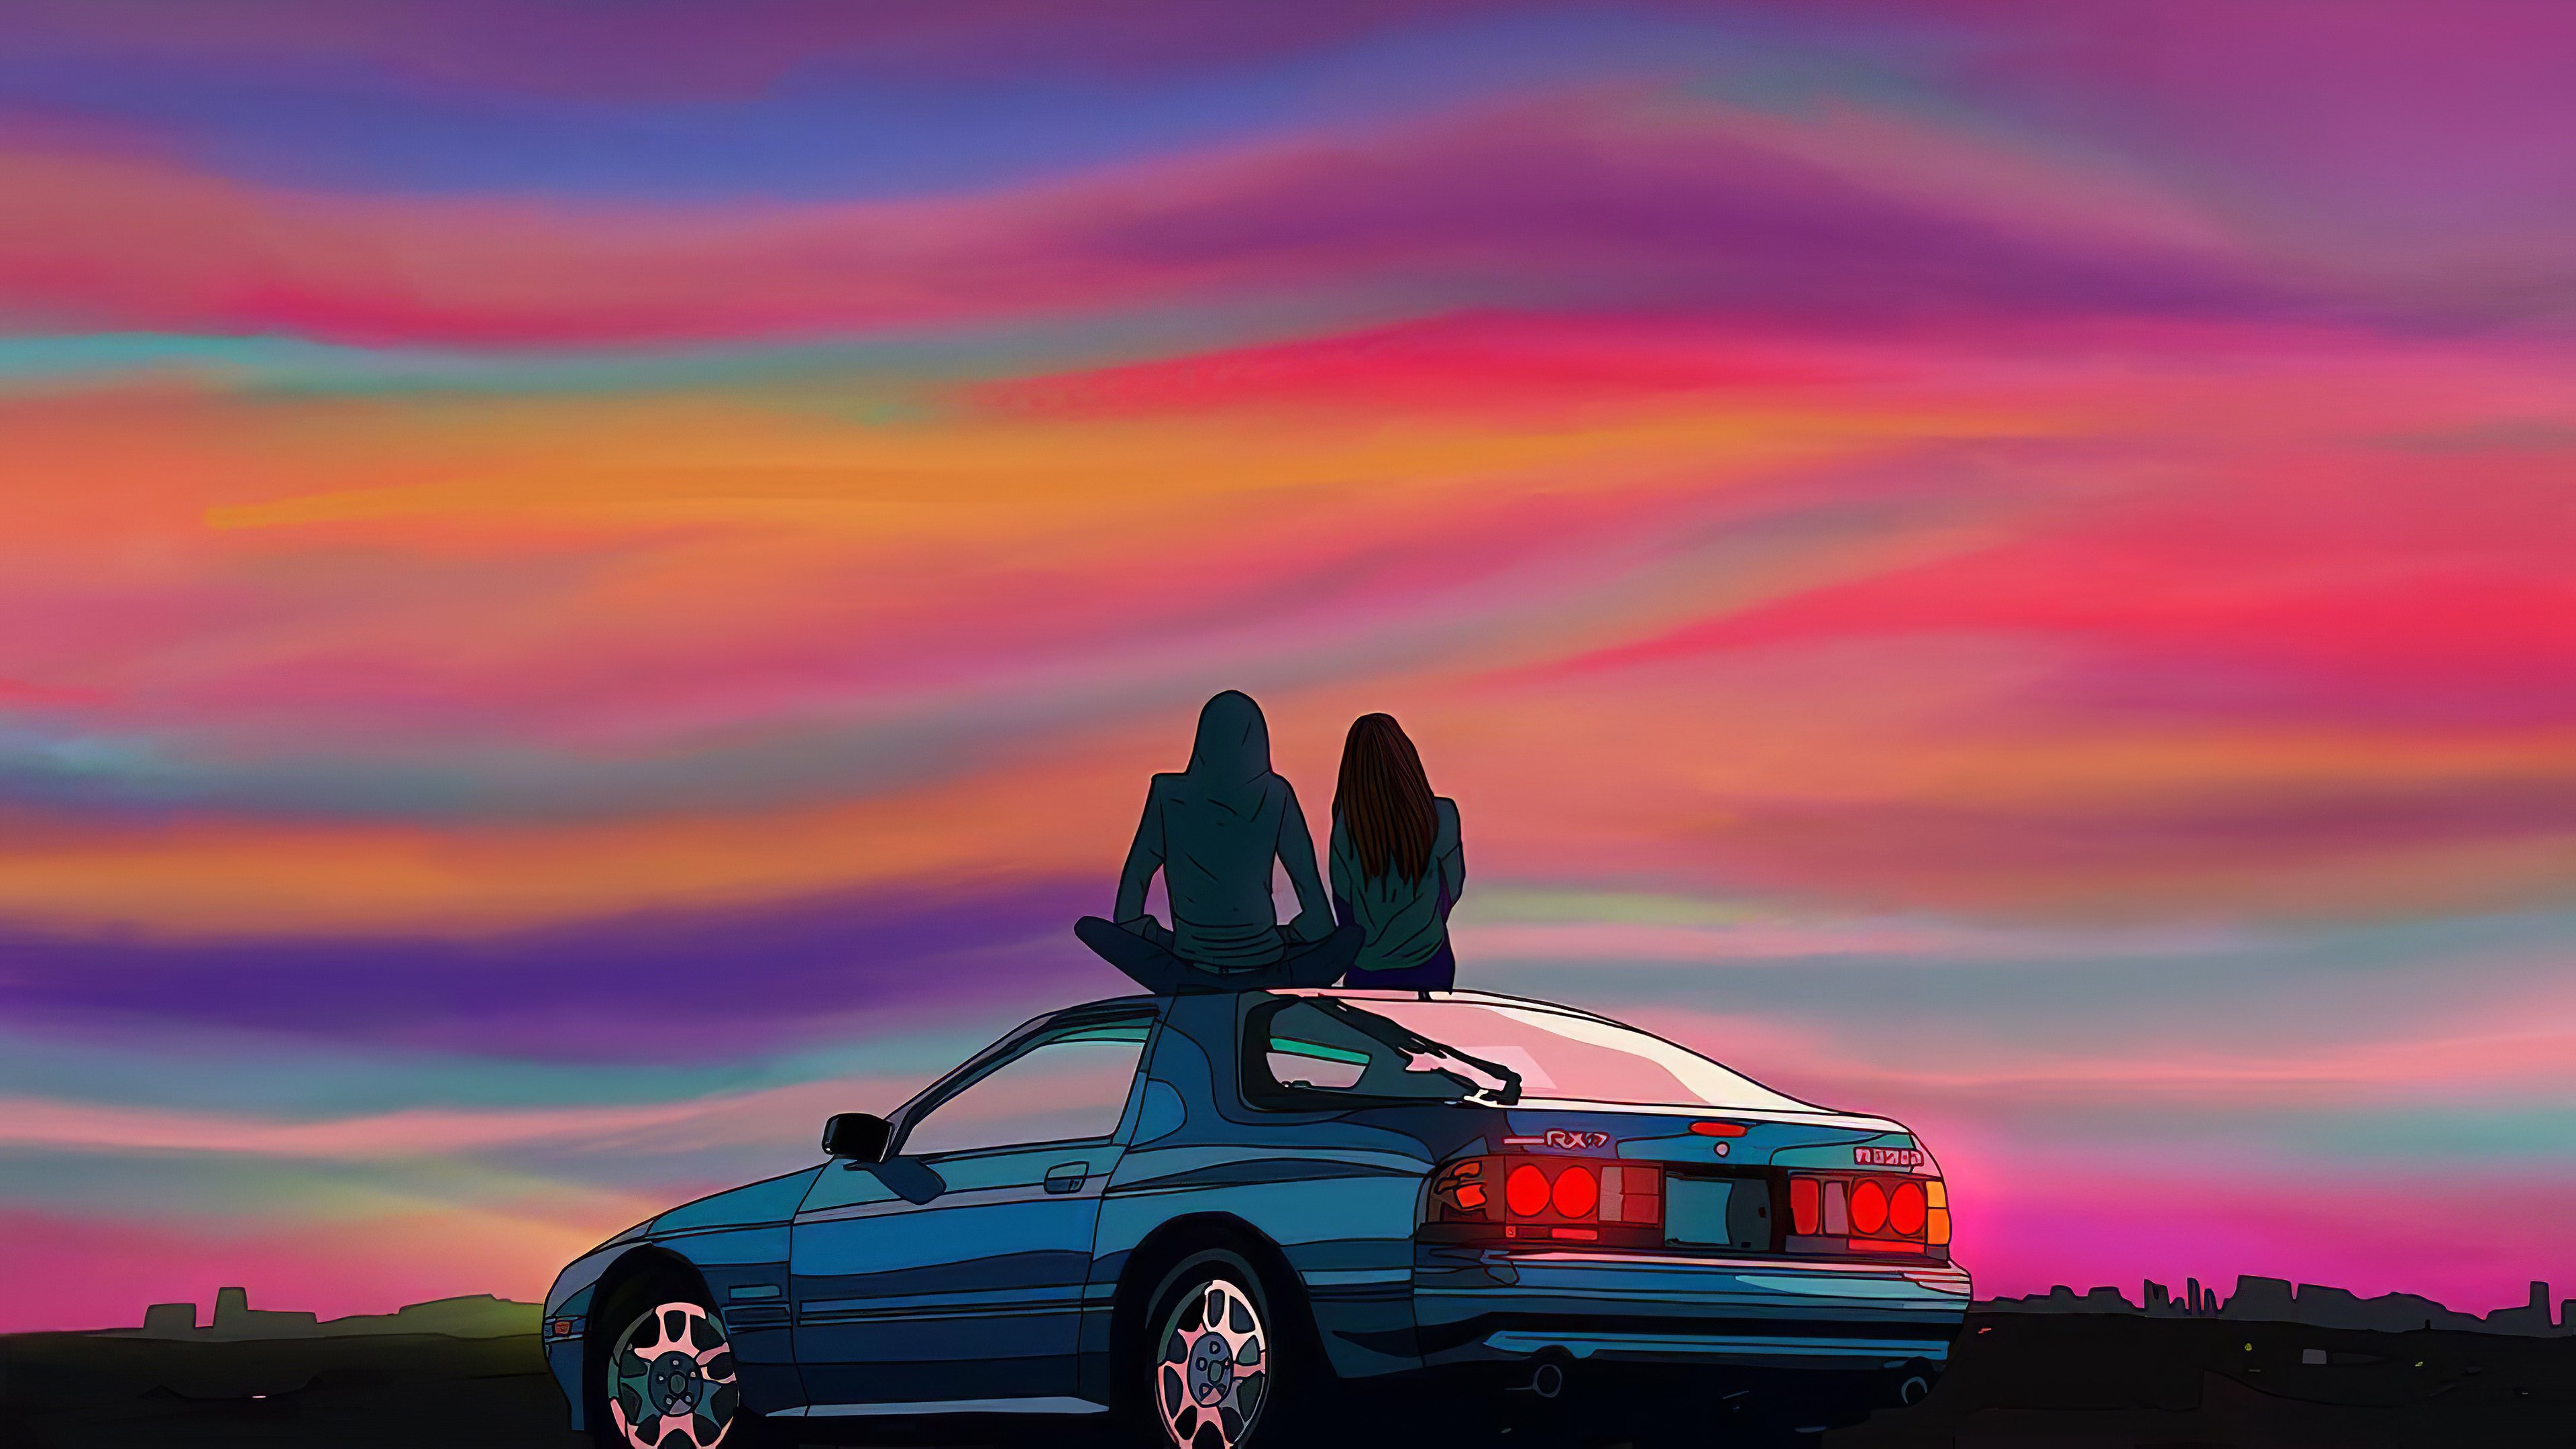 Wallpaper Couple sitting on car at sunset